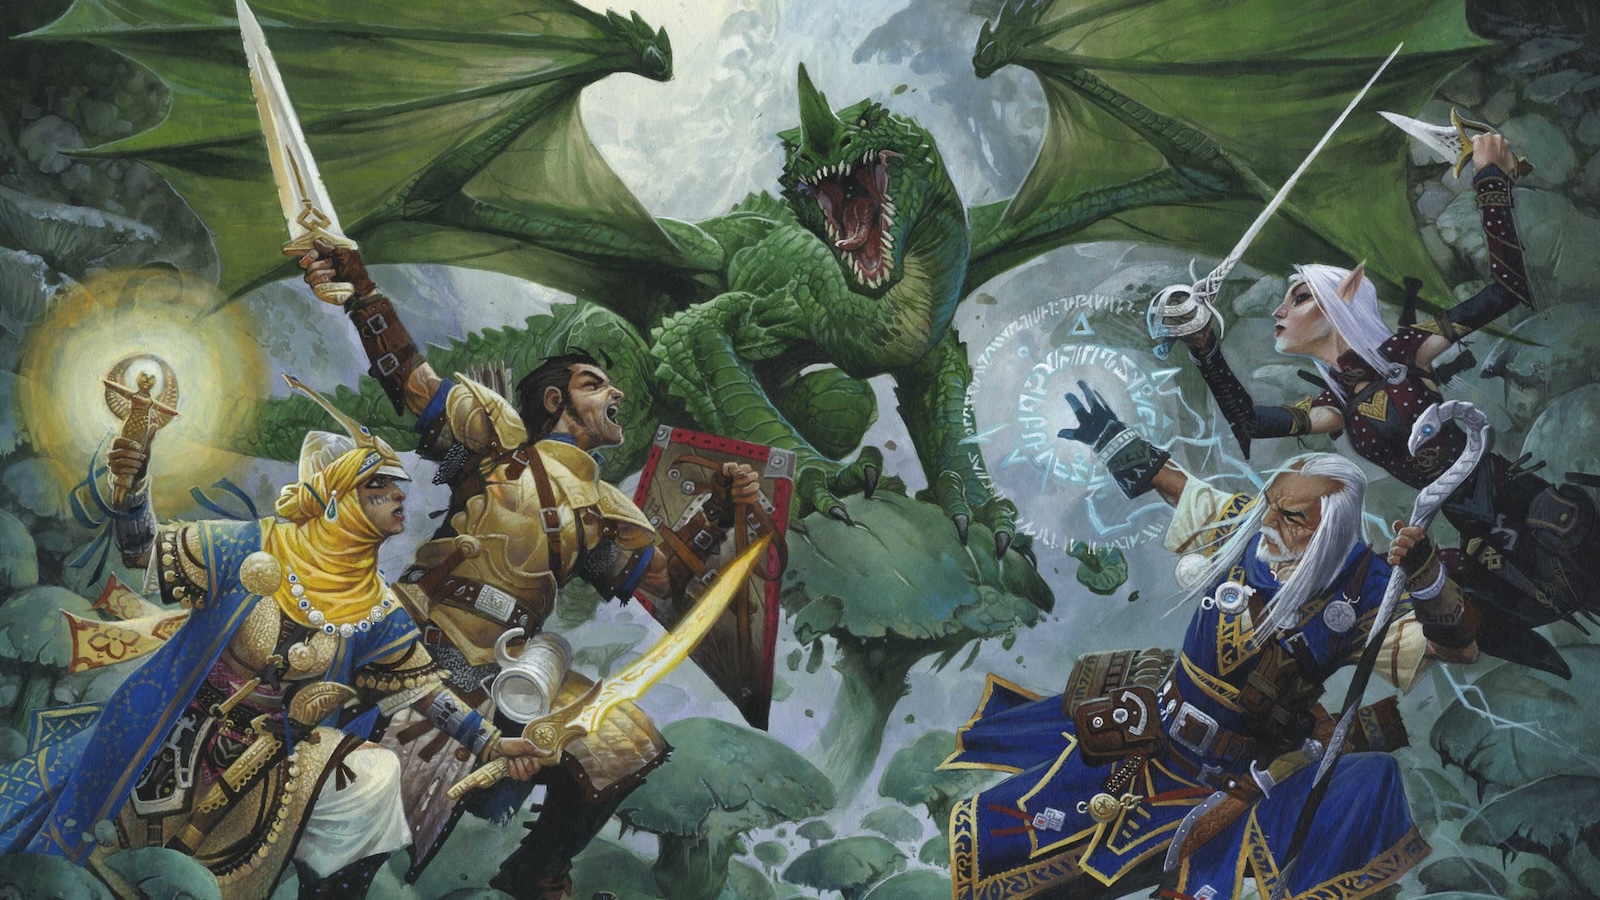 Humble Bundle RPG deal has more Pathfinder content than you probably need  (update) - Polygon